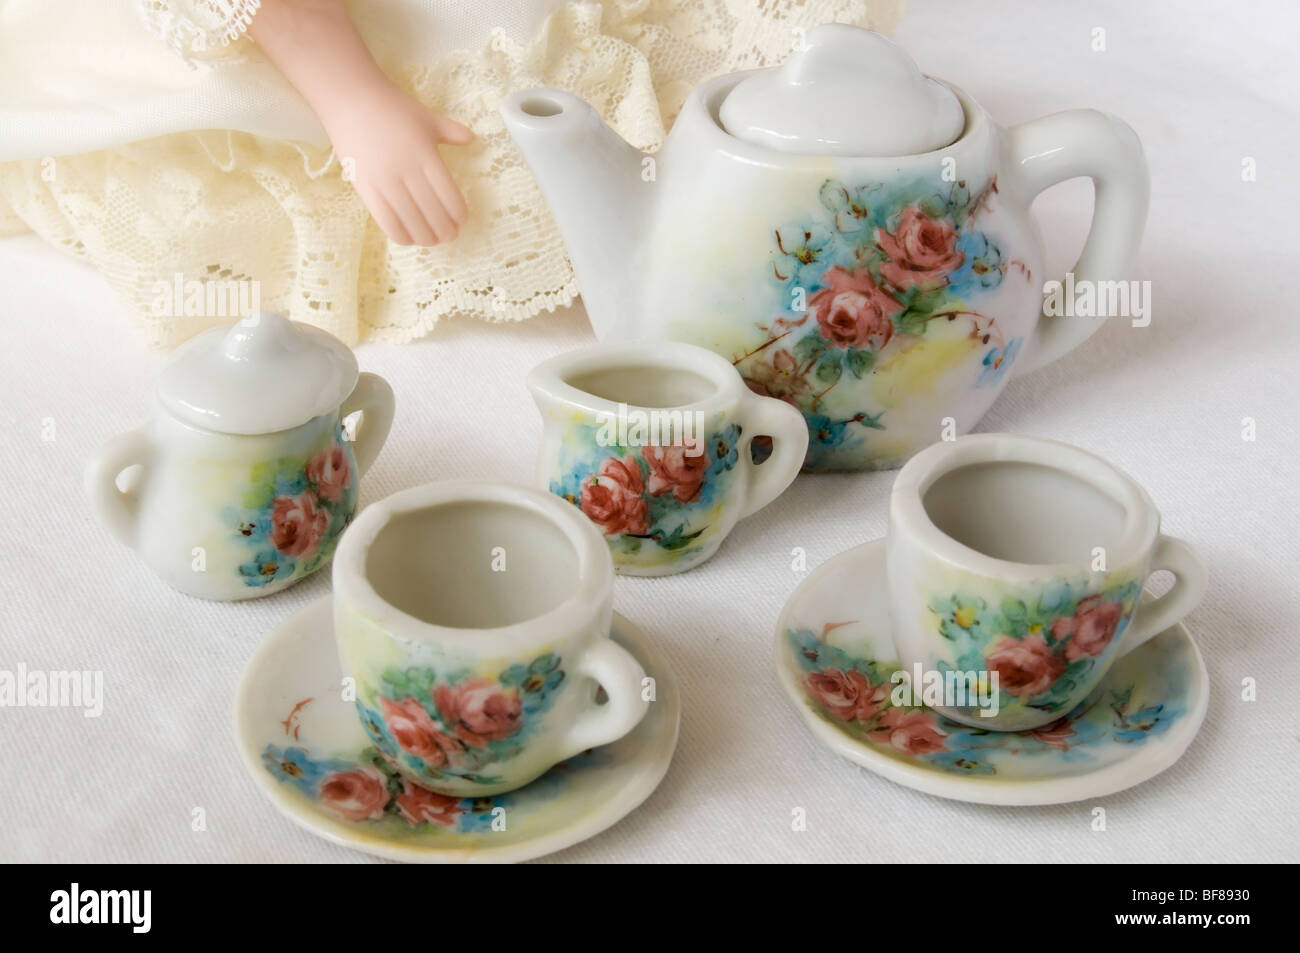 Closeup of miniature tea set painted with a floral design.  Portion of a doll can be seen in background. Stock Photo